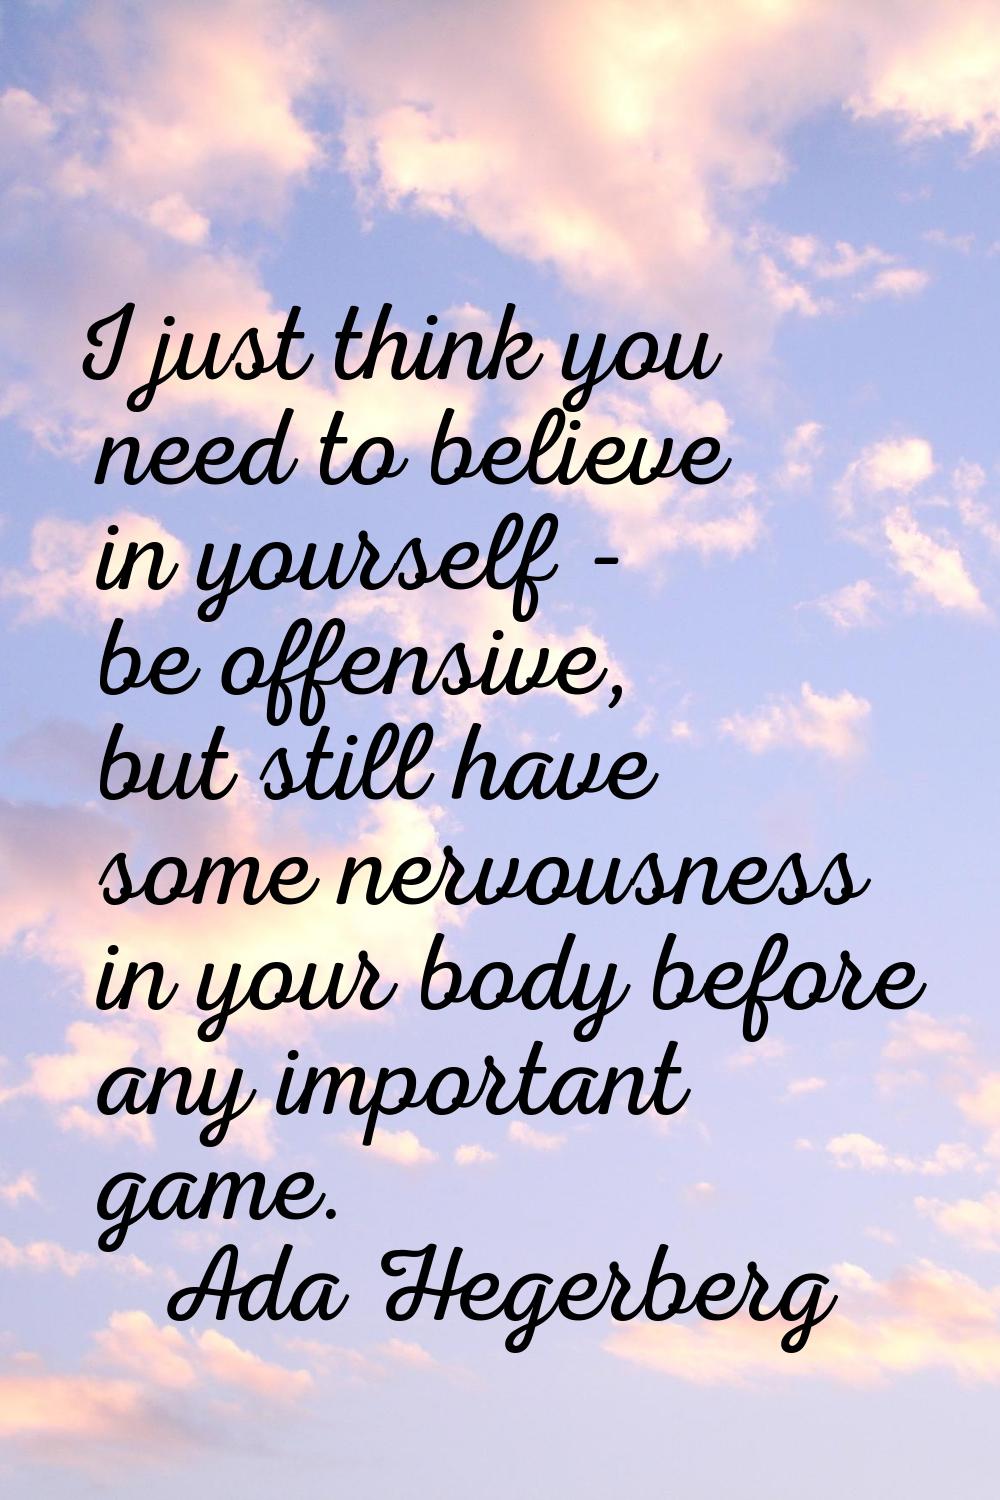 I just think you need to believe in yourself - be offensive, but still have some nervousness in you